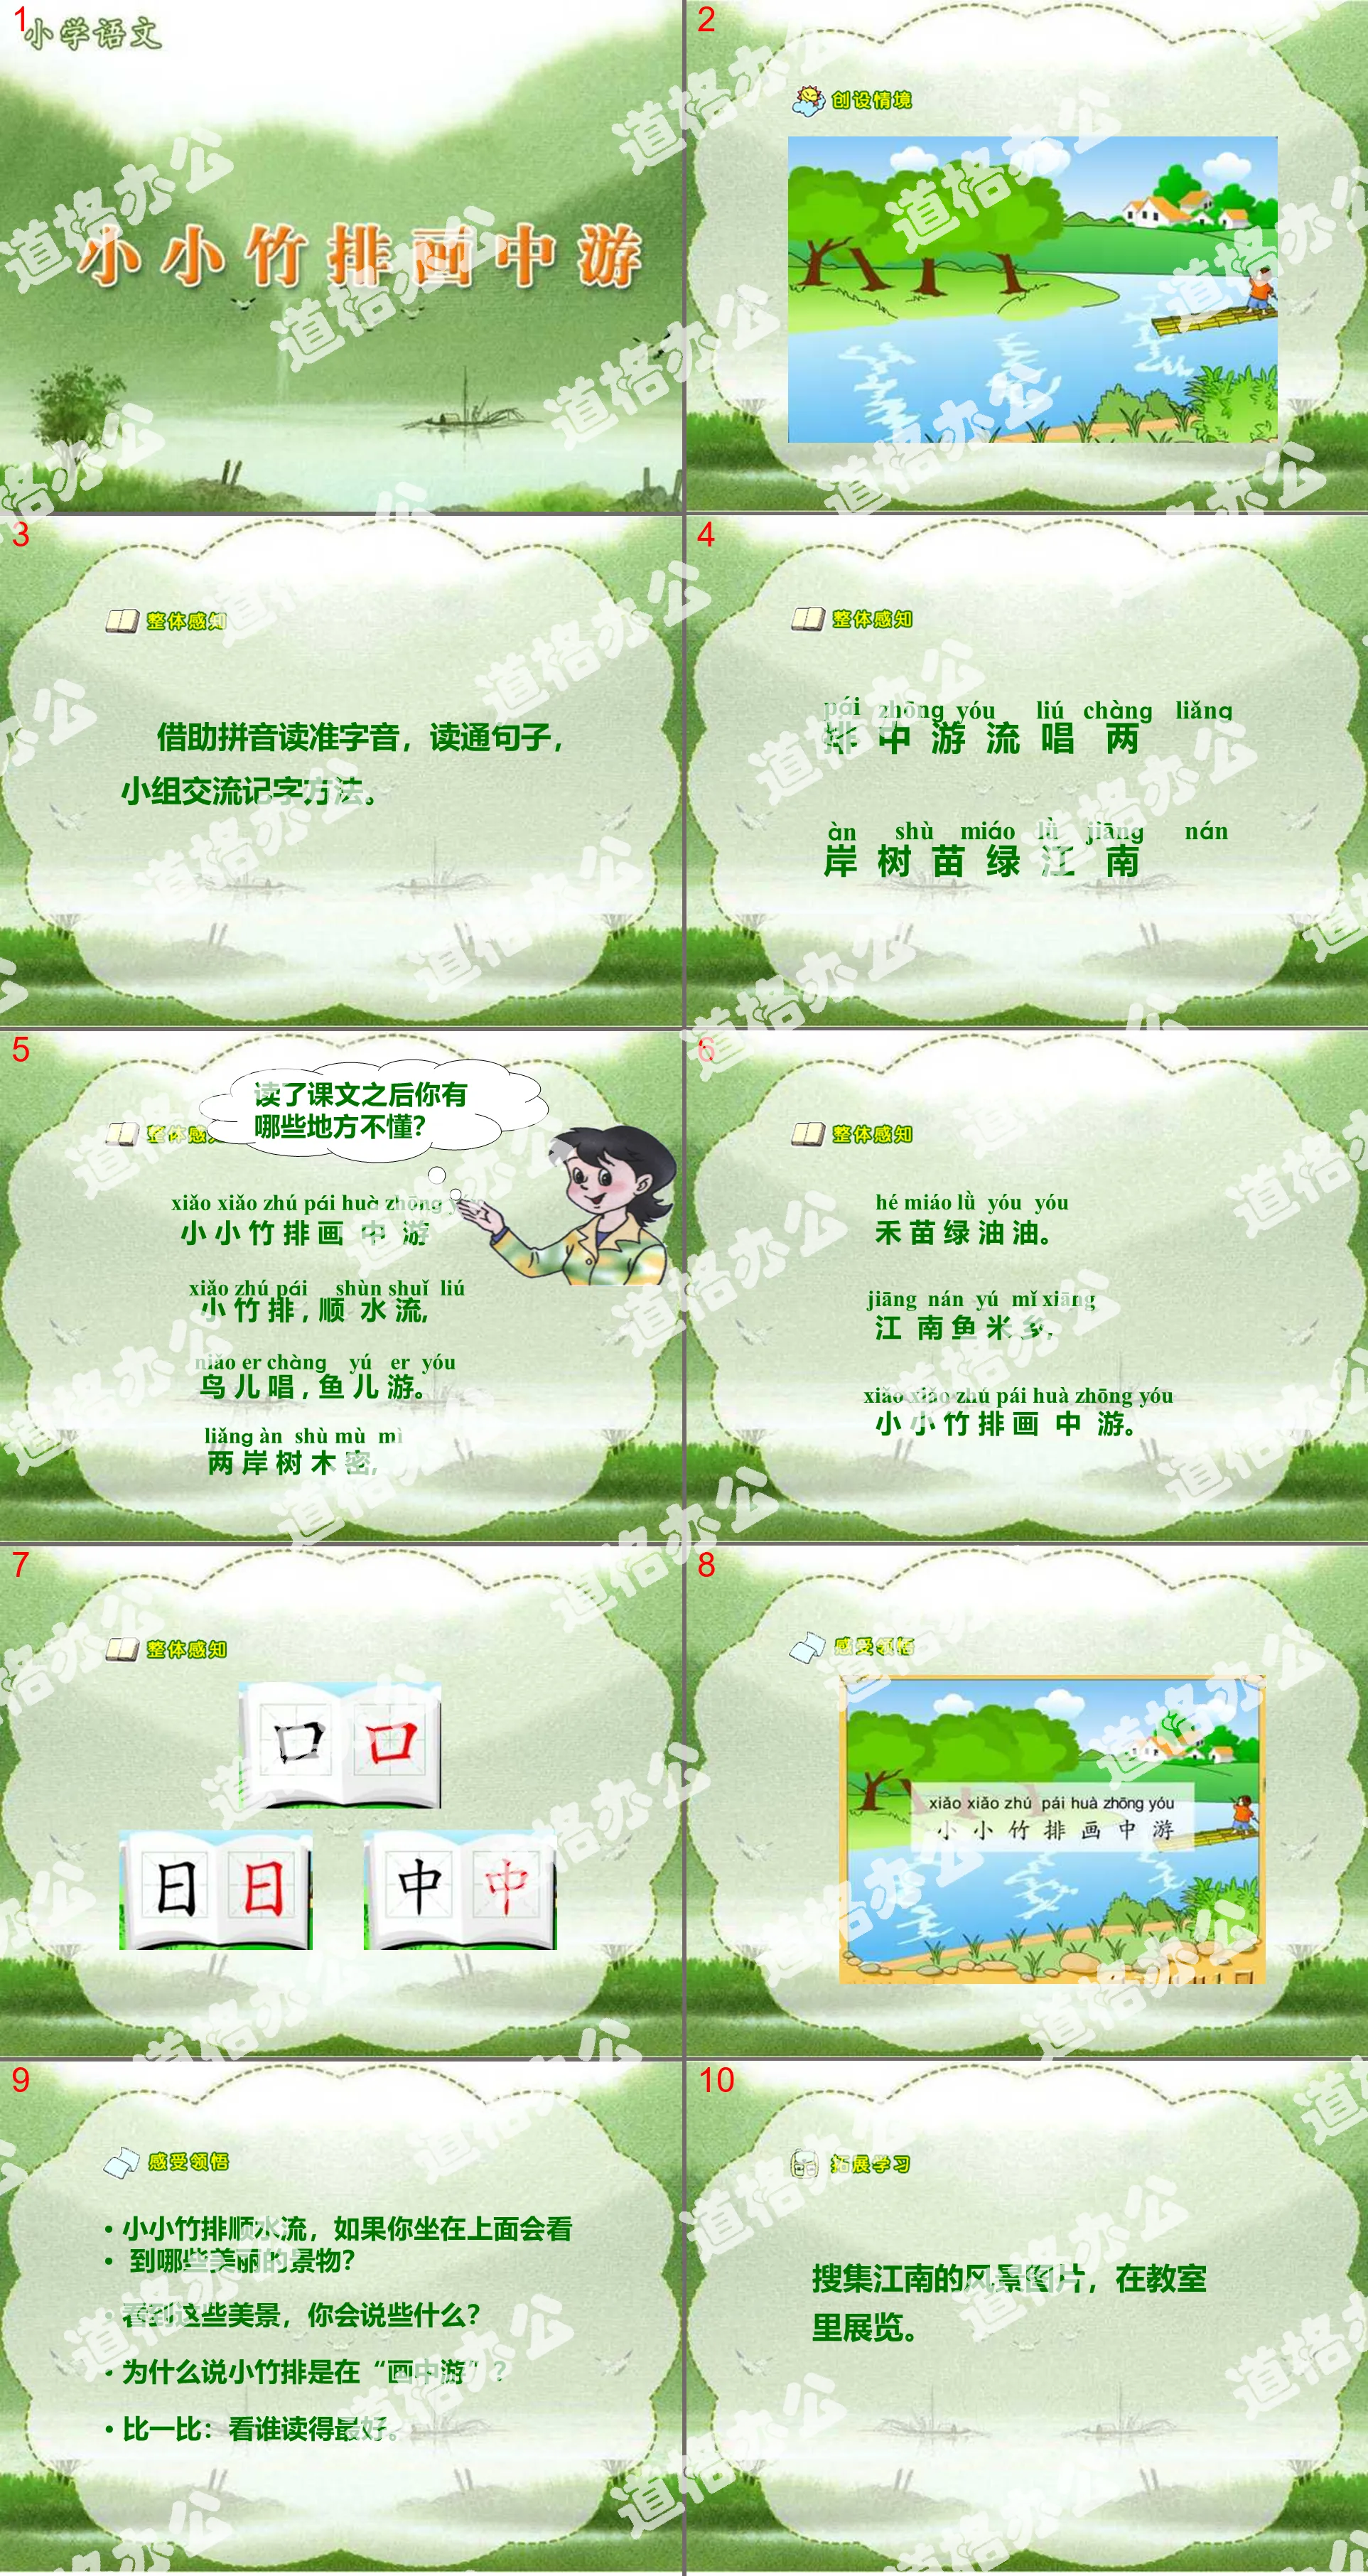 Download the PPT courseware of the first volume of Chinese language for primary school students published by the People's Education Press "The Middle Journey of Little Bamboo Raft Painting";